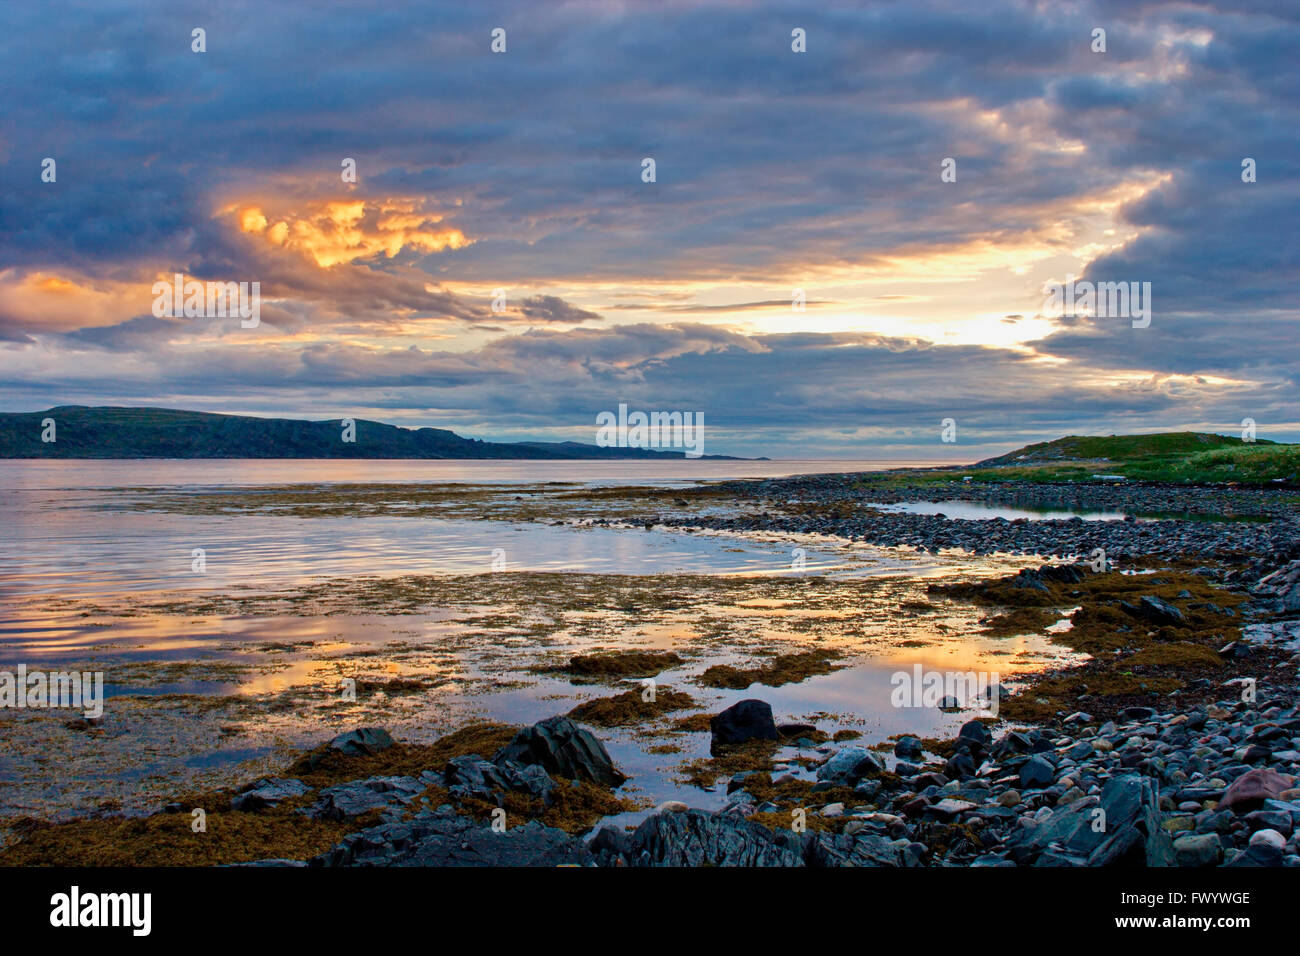 View over Bussesundet from island Vardø in the Varanger-region in arctic Norway at sunset. Stock Photo